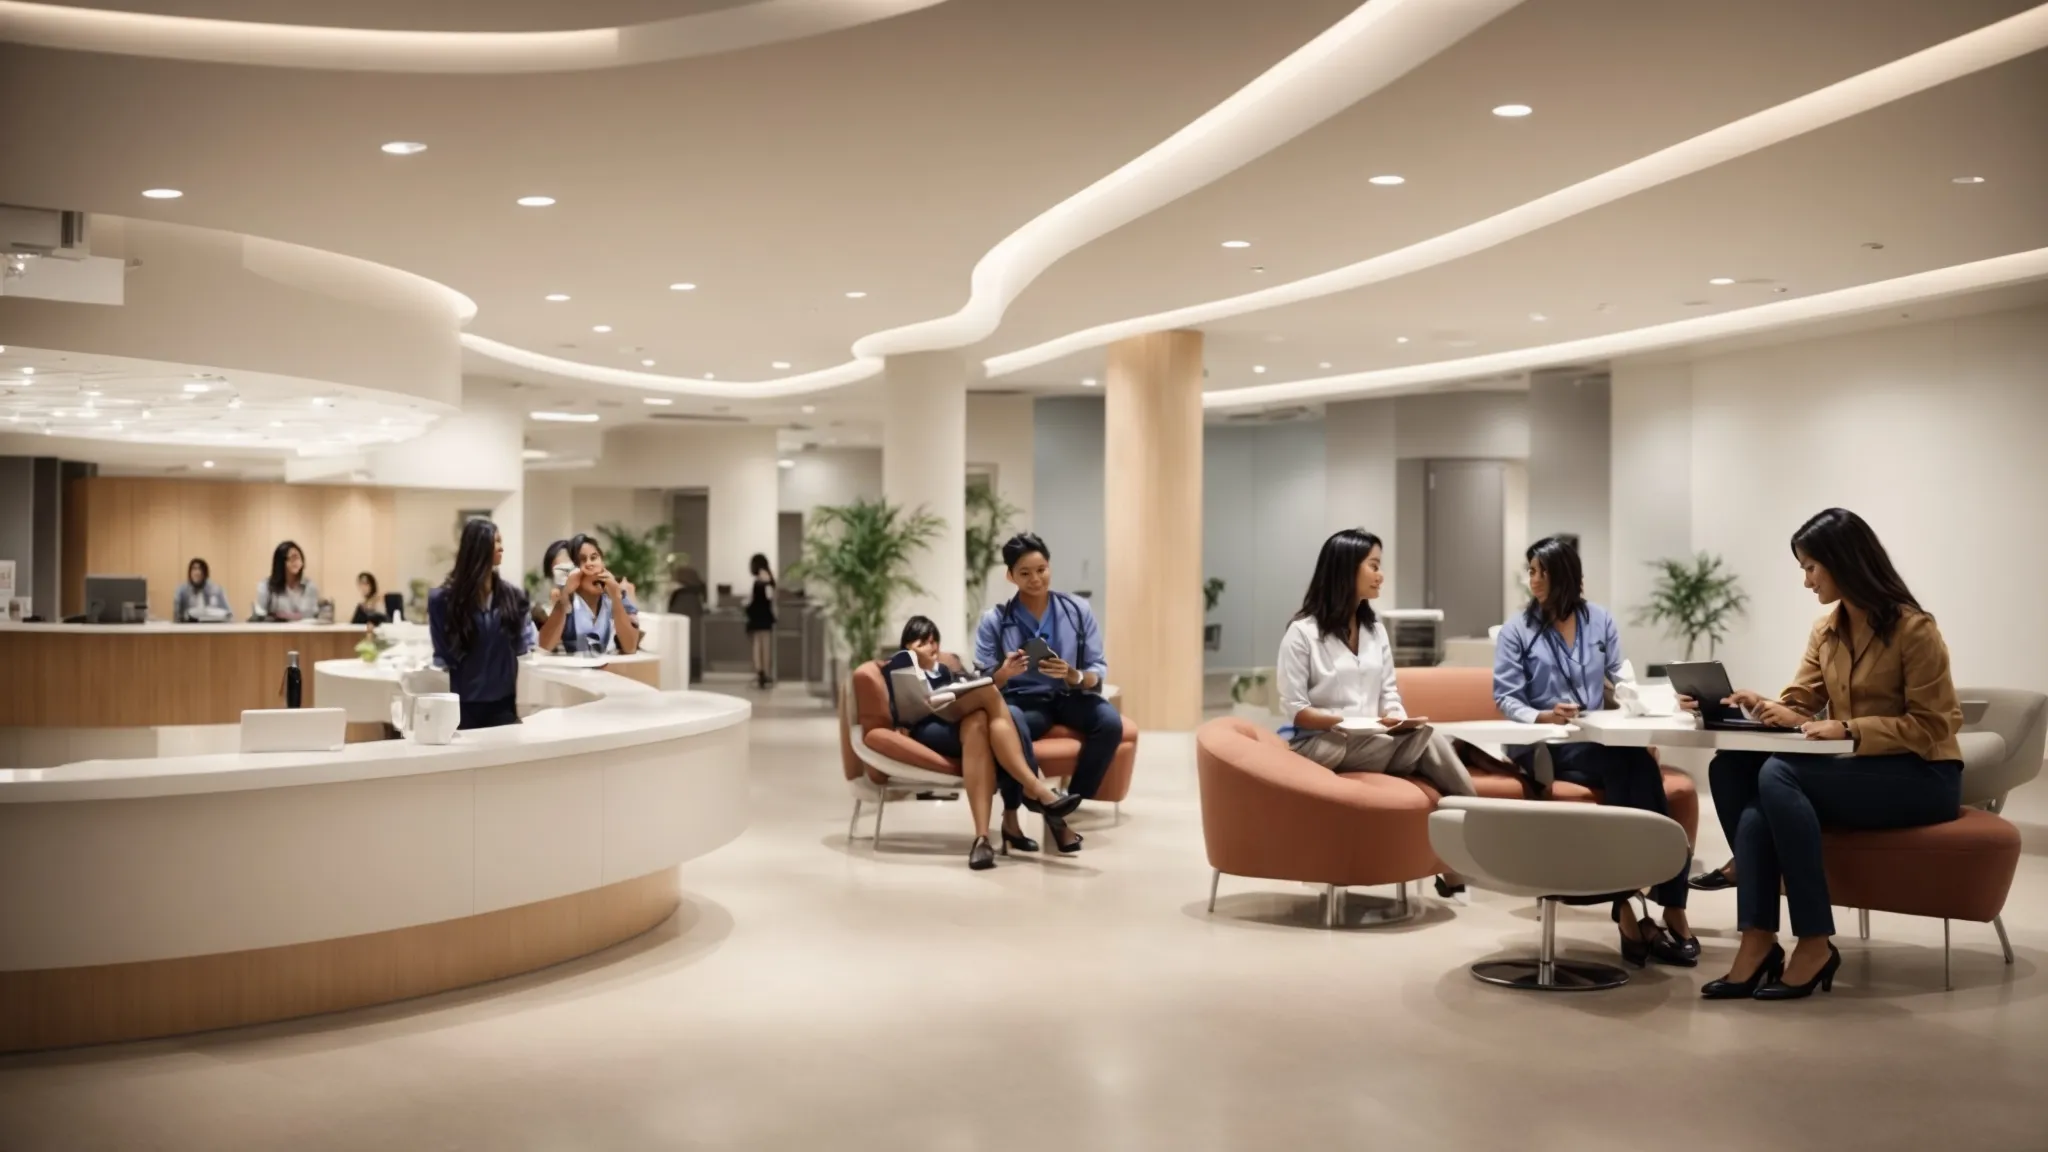 a modern, well-lit healthcare facility reception with people engaging on various digital devices.